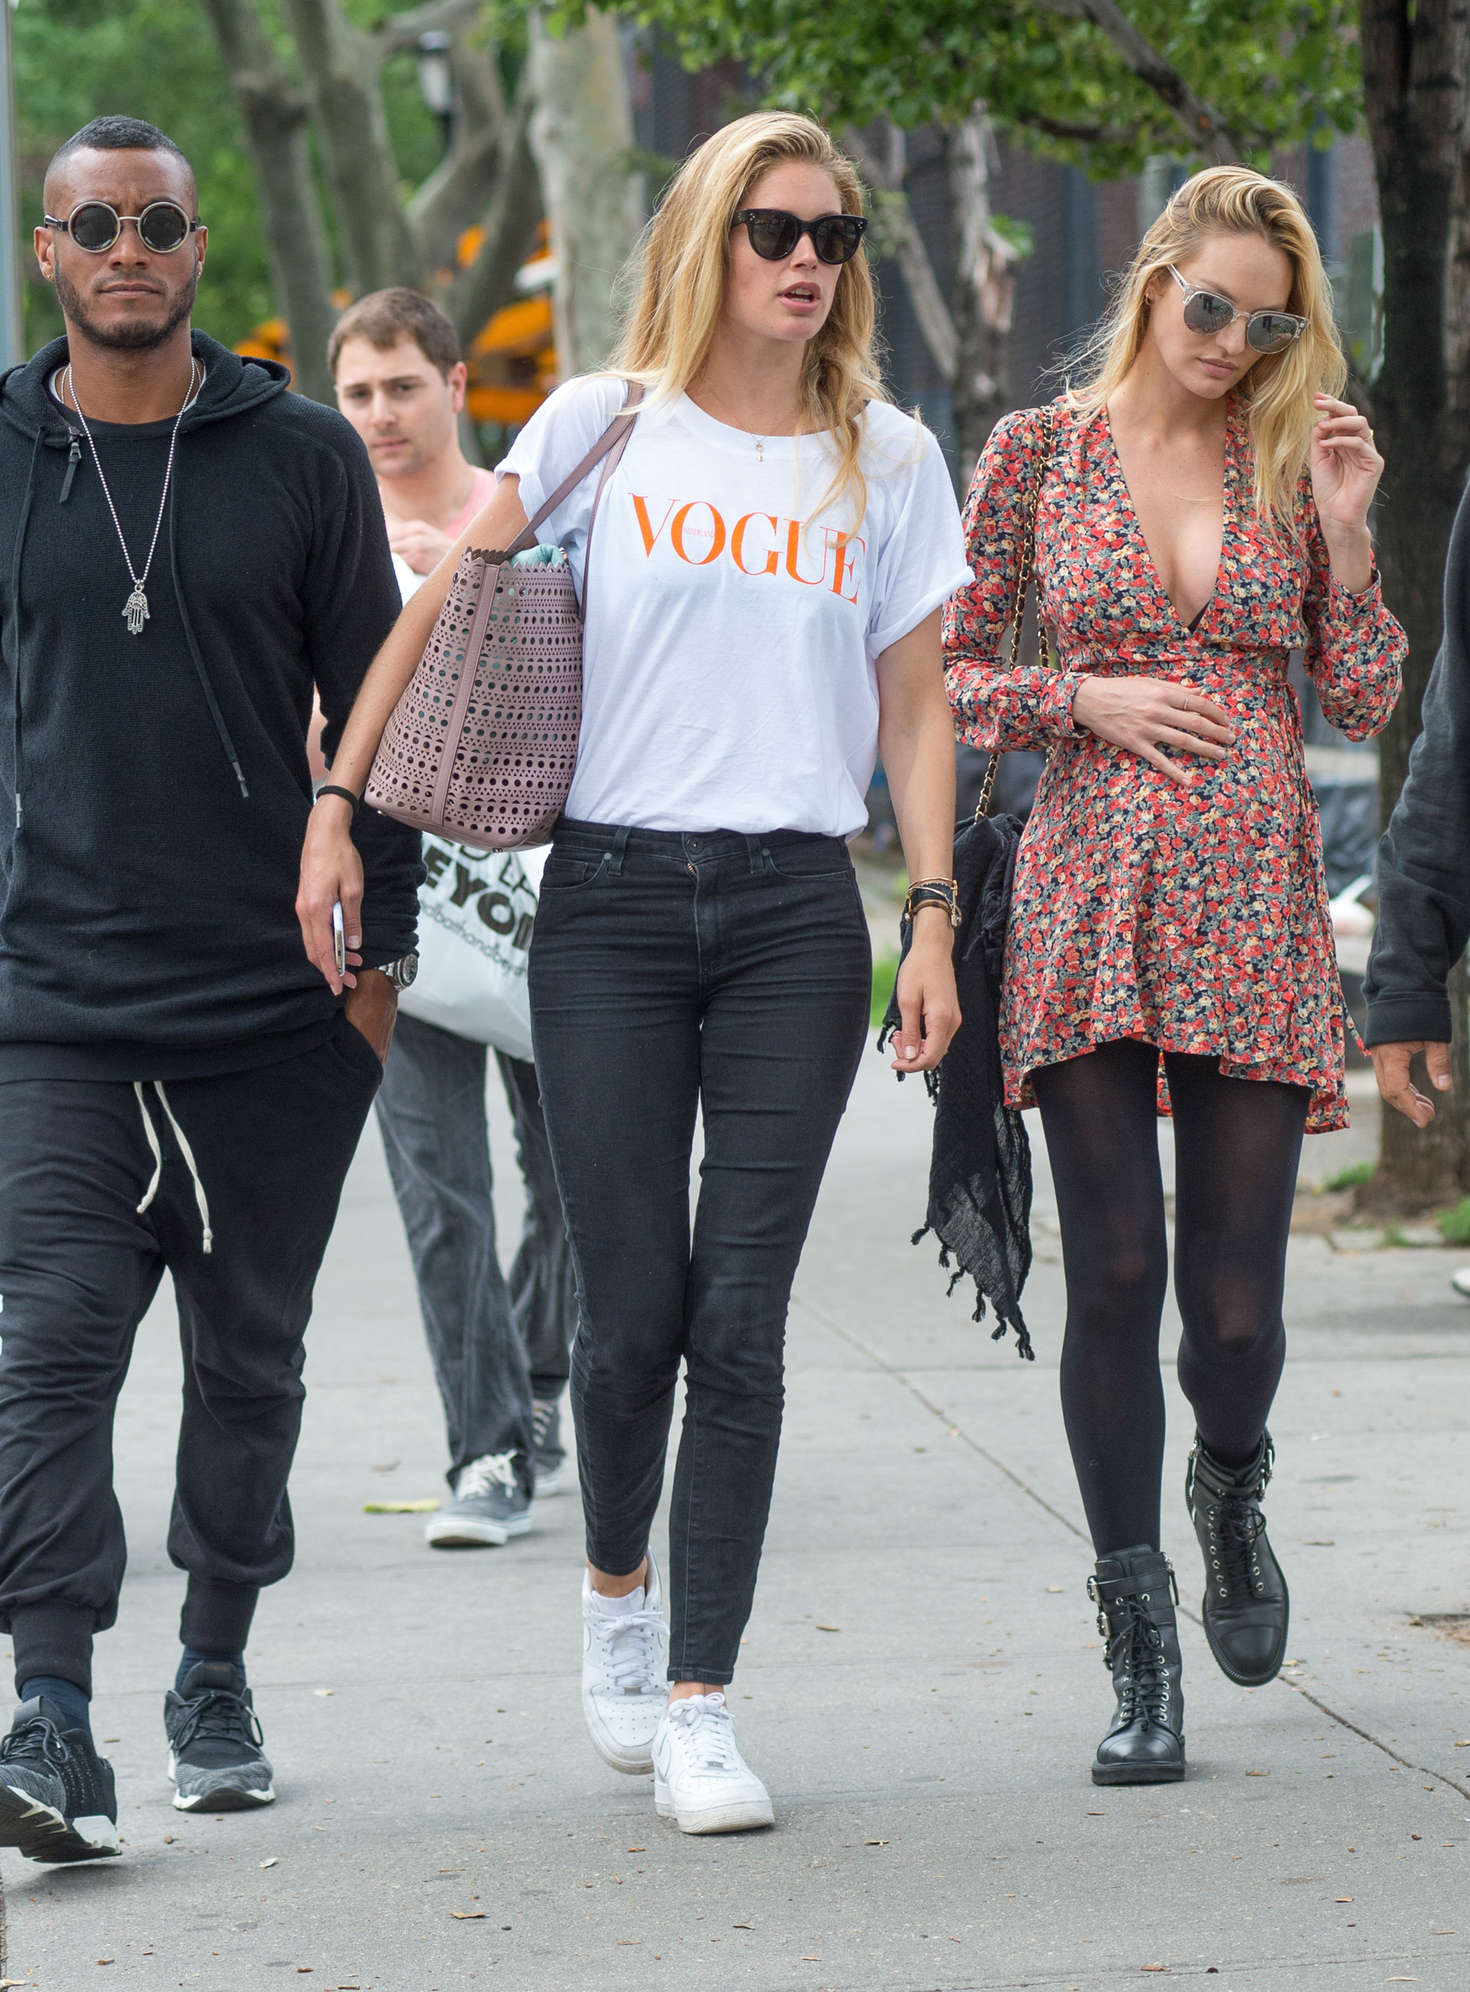 Candice Swanepoel and Doutzen Kroes out in NYC -03 | GotCeleb